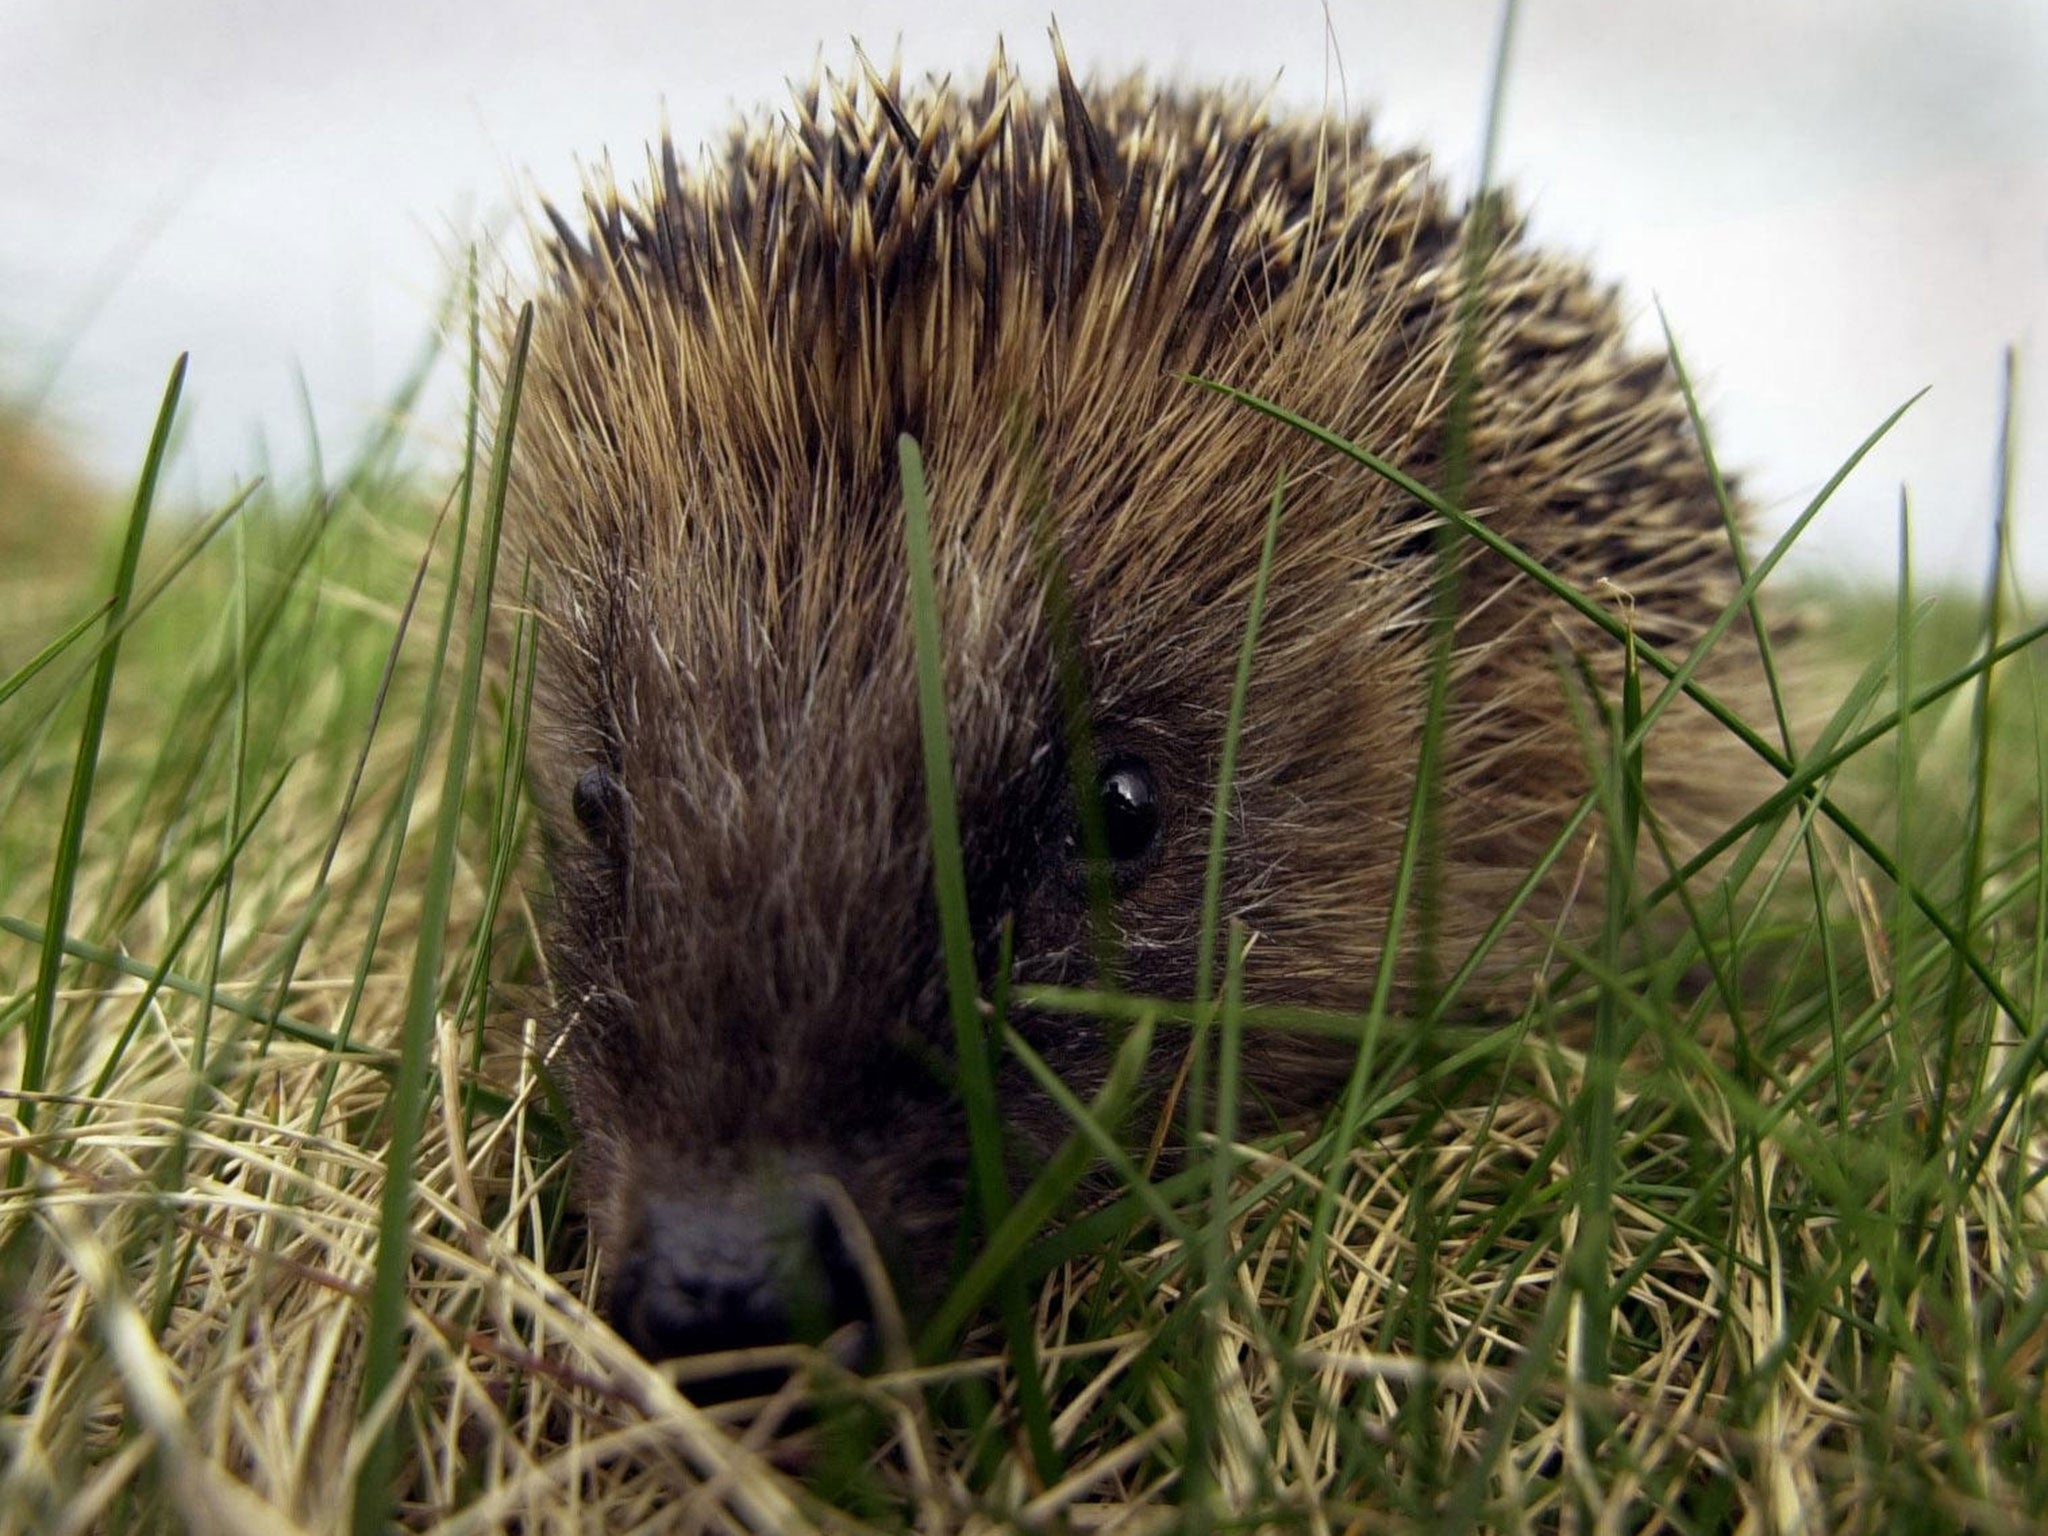 Most people questioned in a survey said they would happily cut a hole in their fences to allow access for hedgehogs